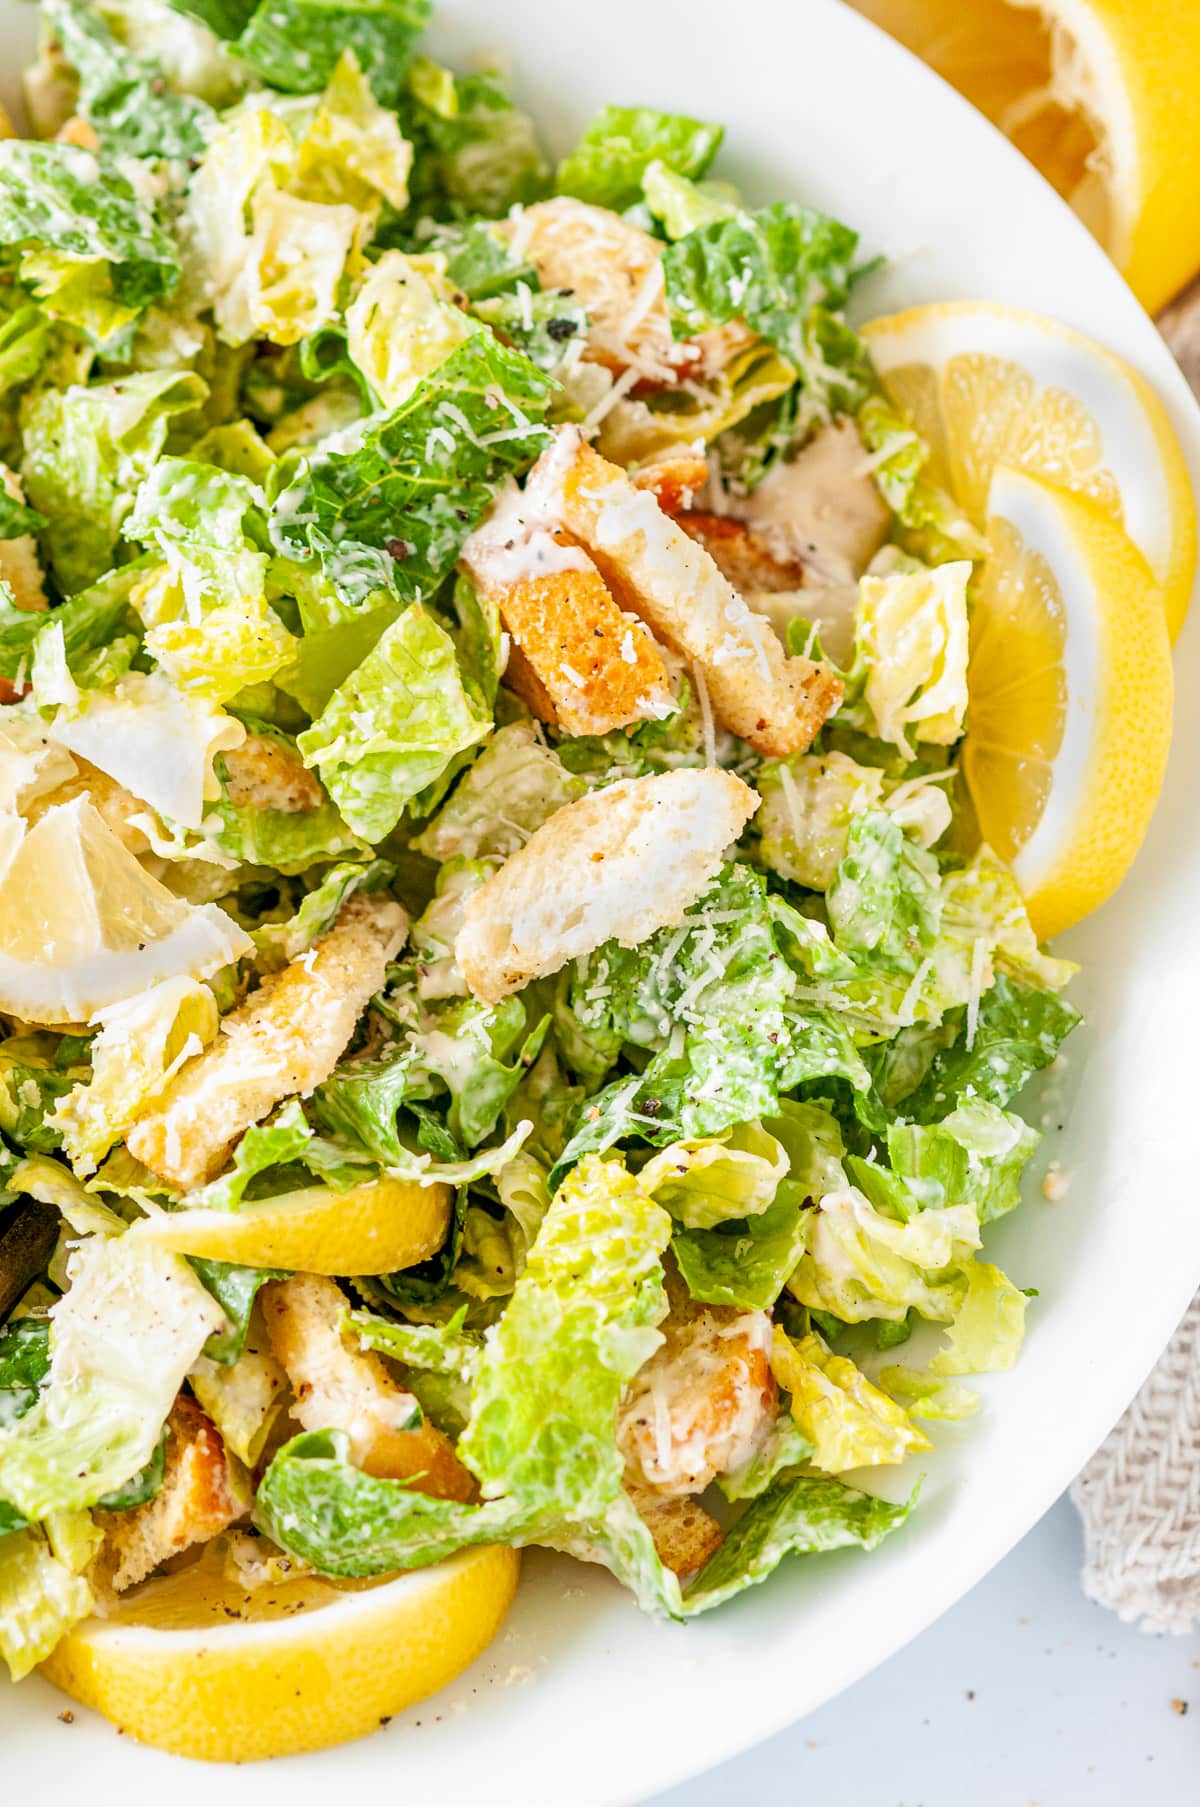 Vegetarian Caesar Salad Dressing tossed with romaine lettuce, lemons and croutons in white bowl close up